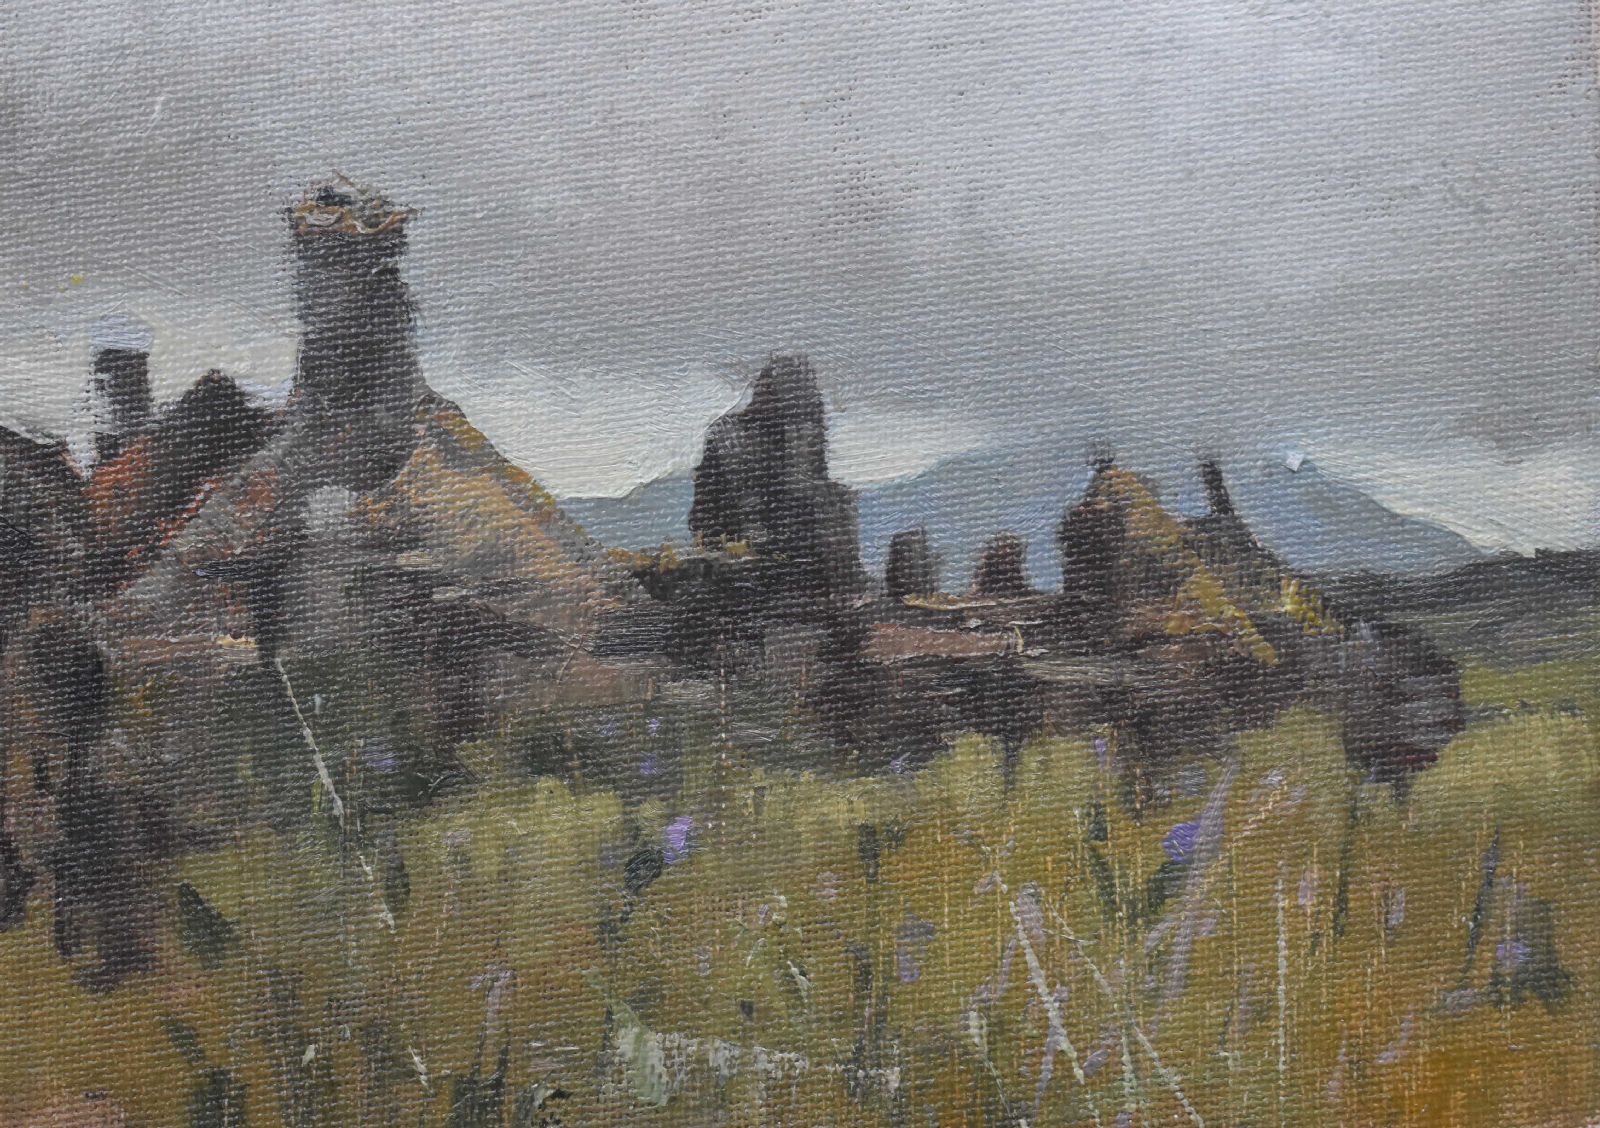 Ruins (Beginish) by Dave West